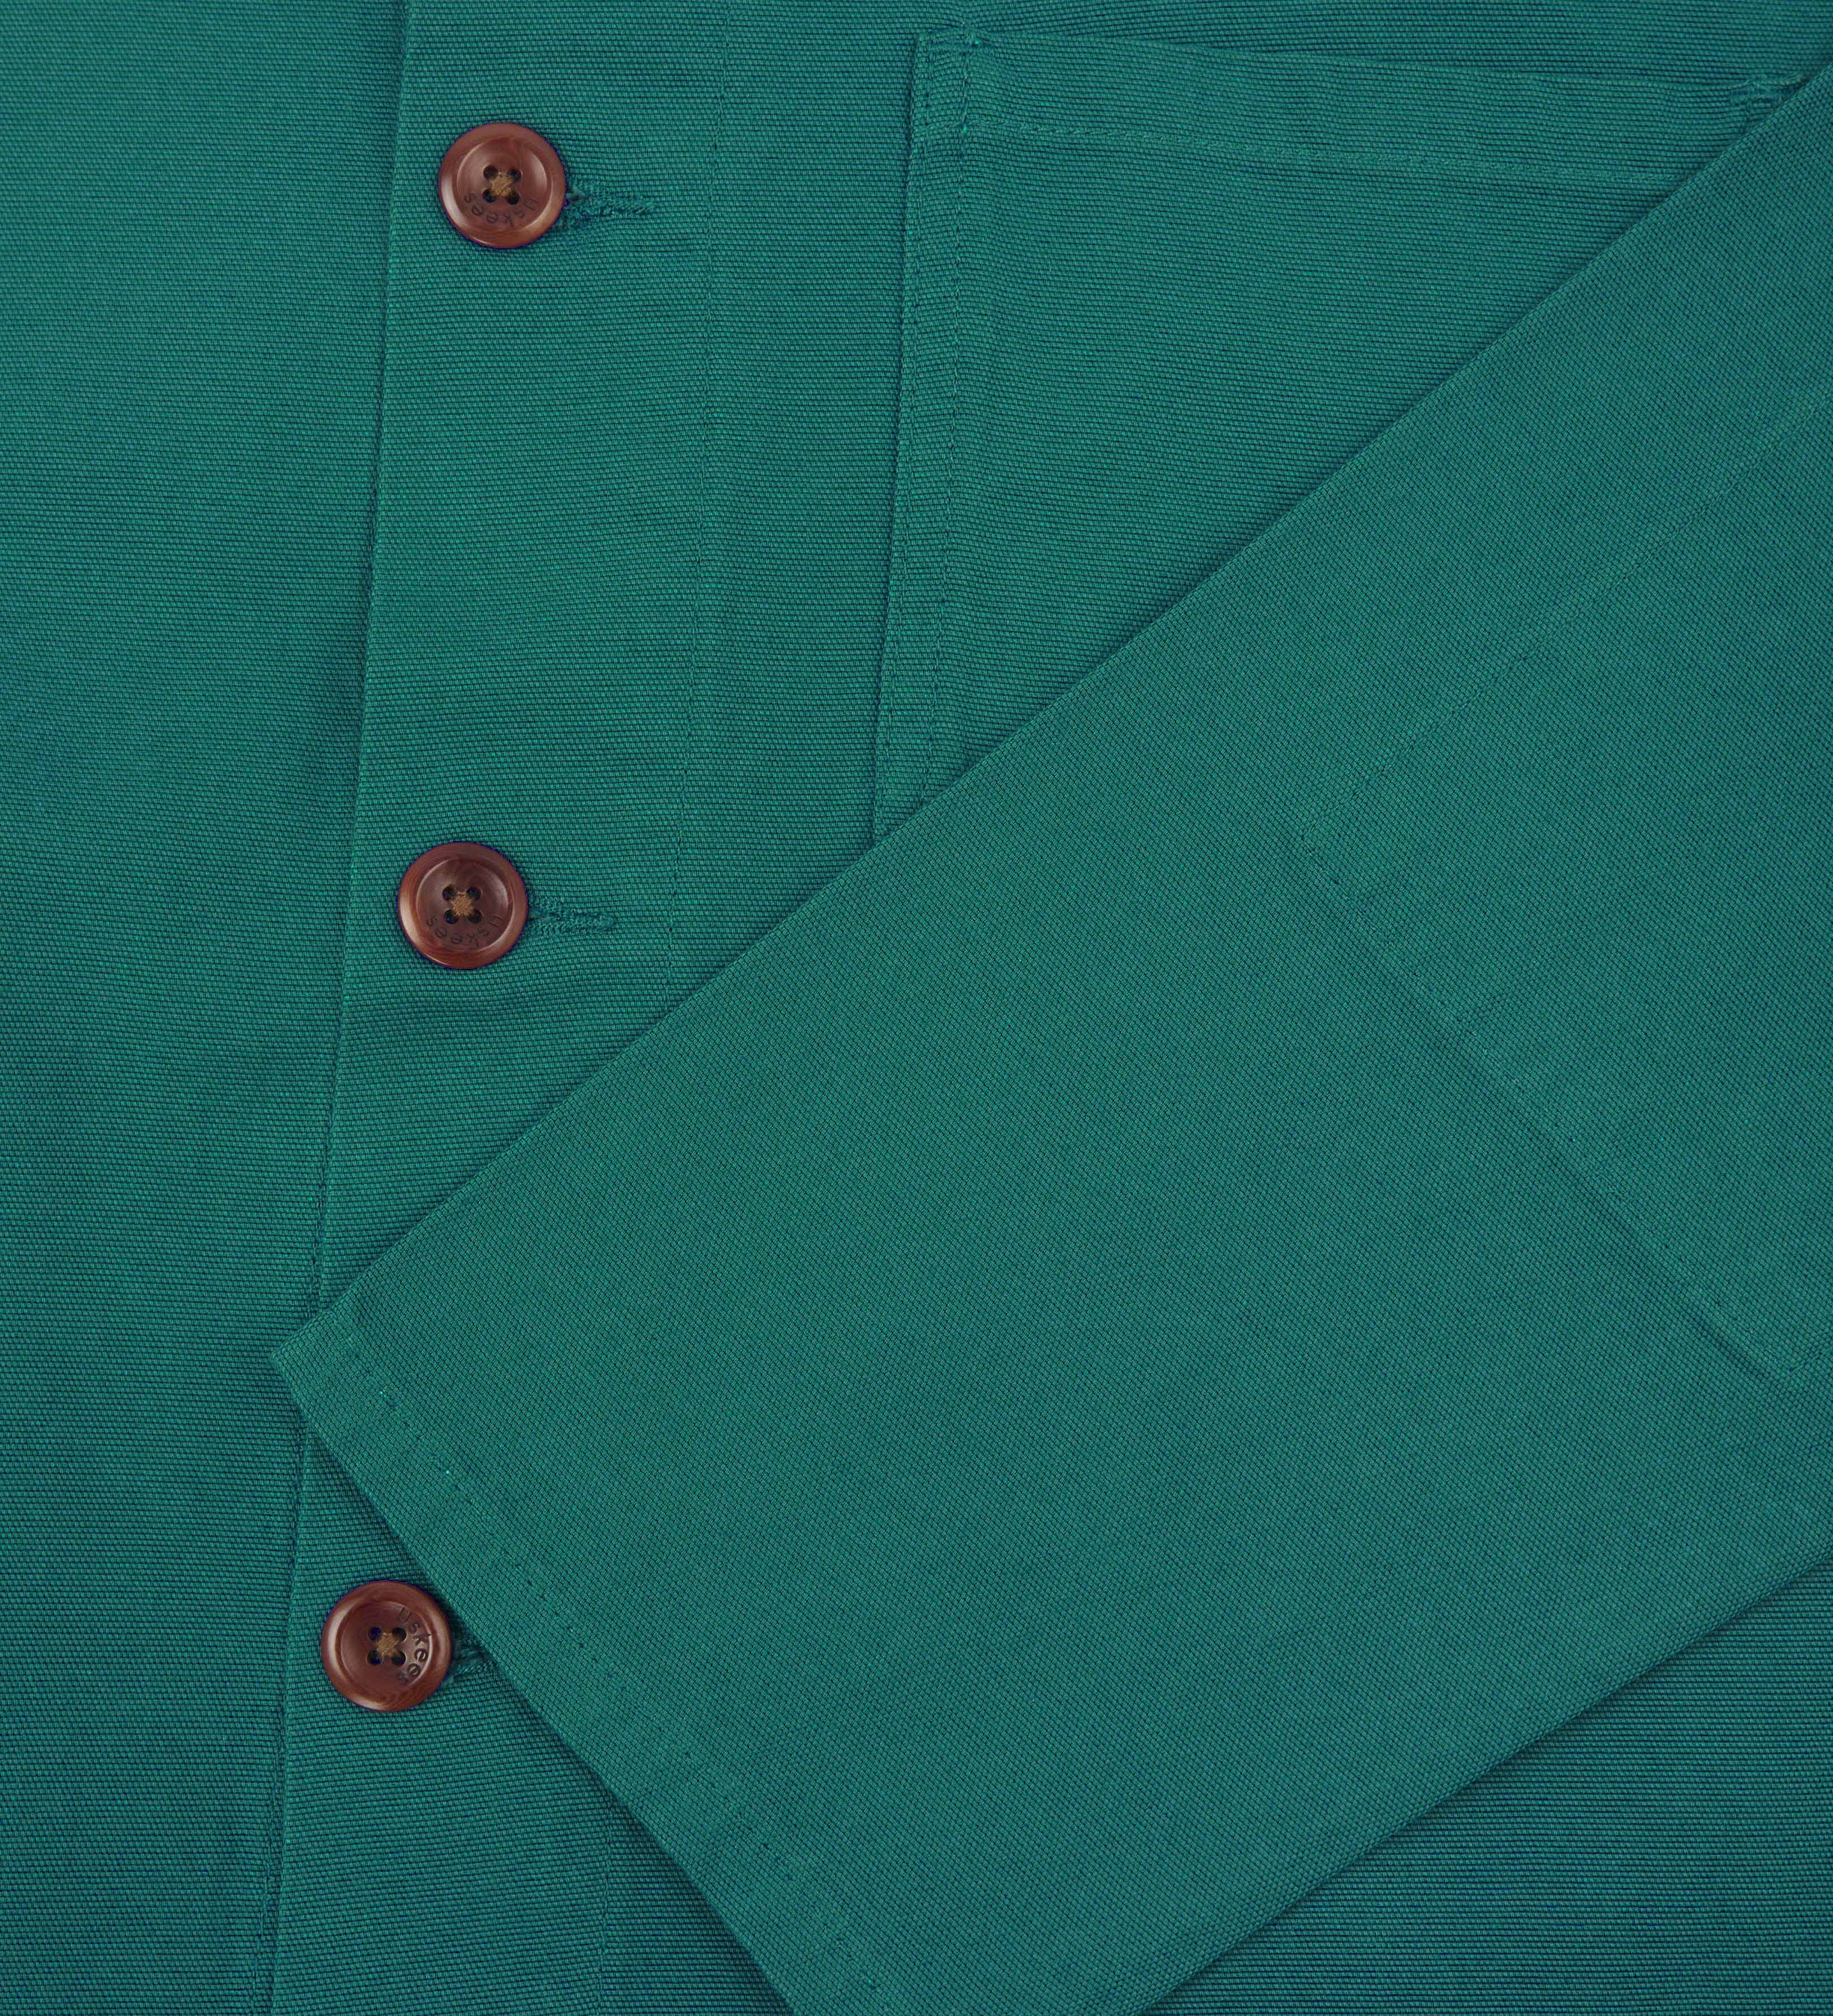 Detail shot of uskees foam green men's overshirt showing the sleeve and corozo buttons.